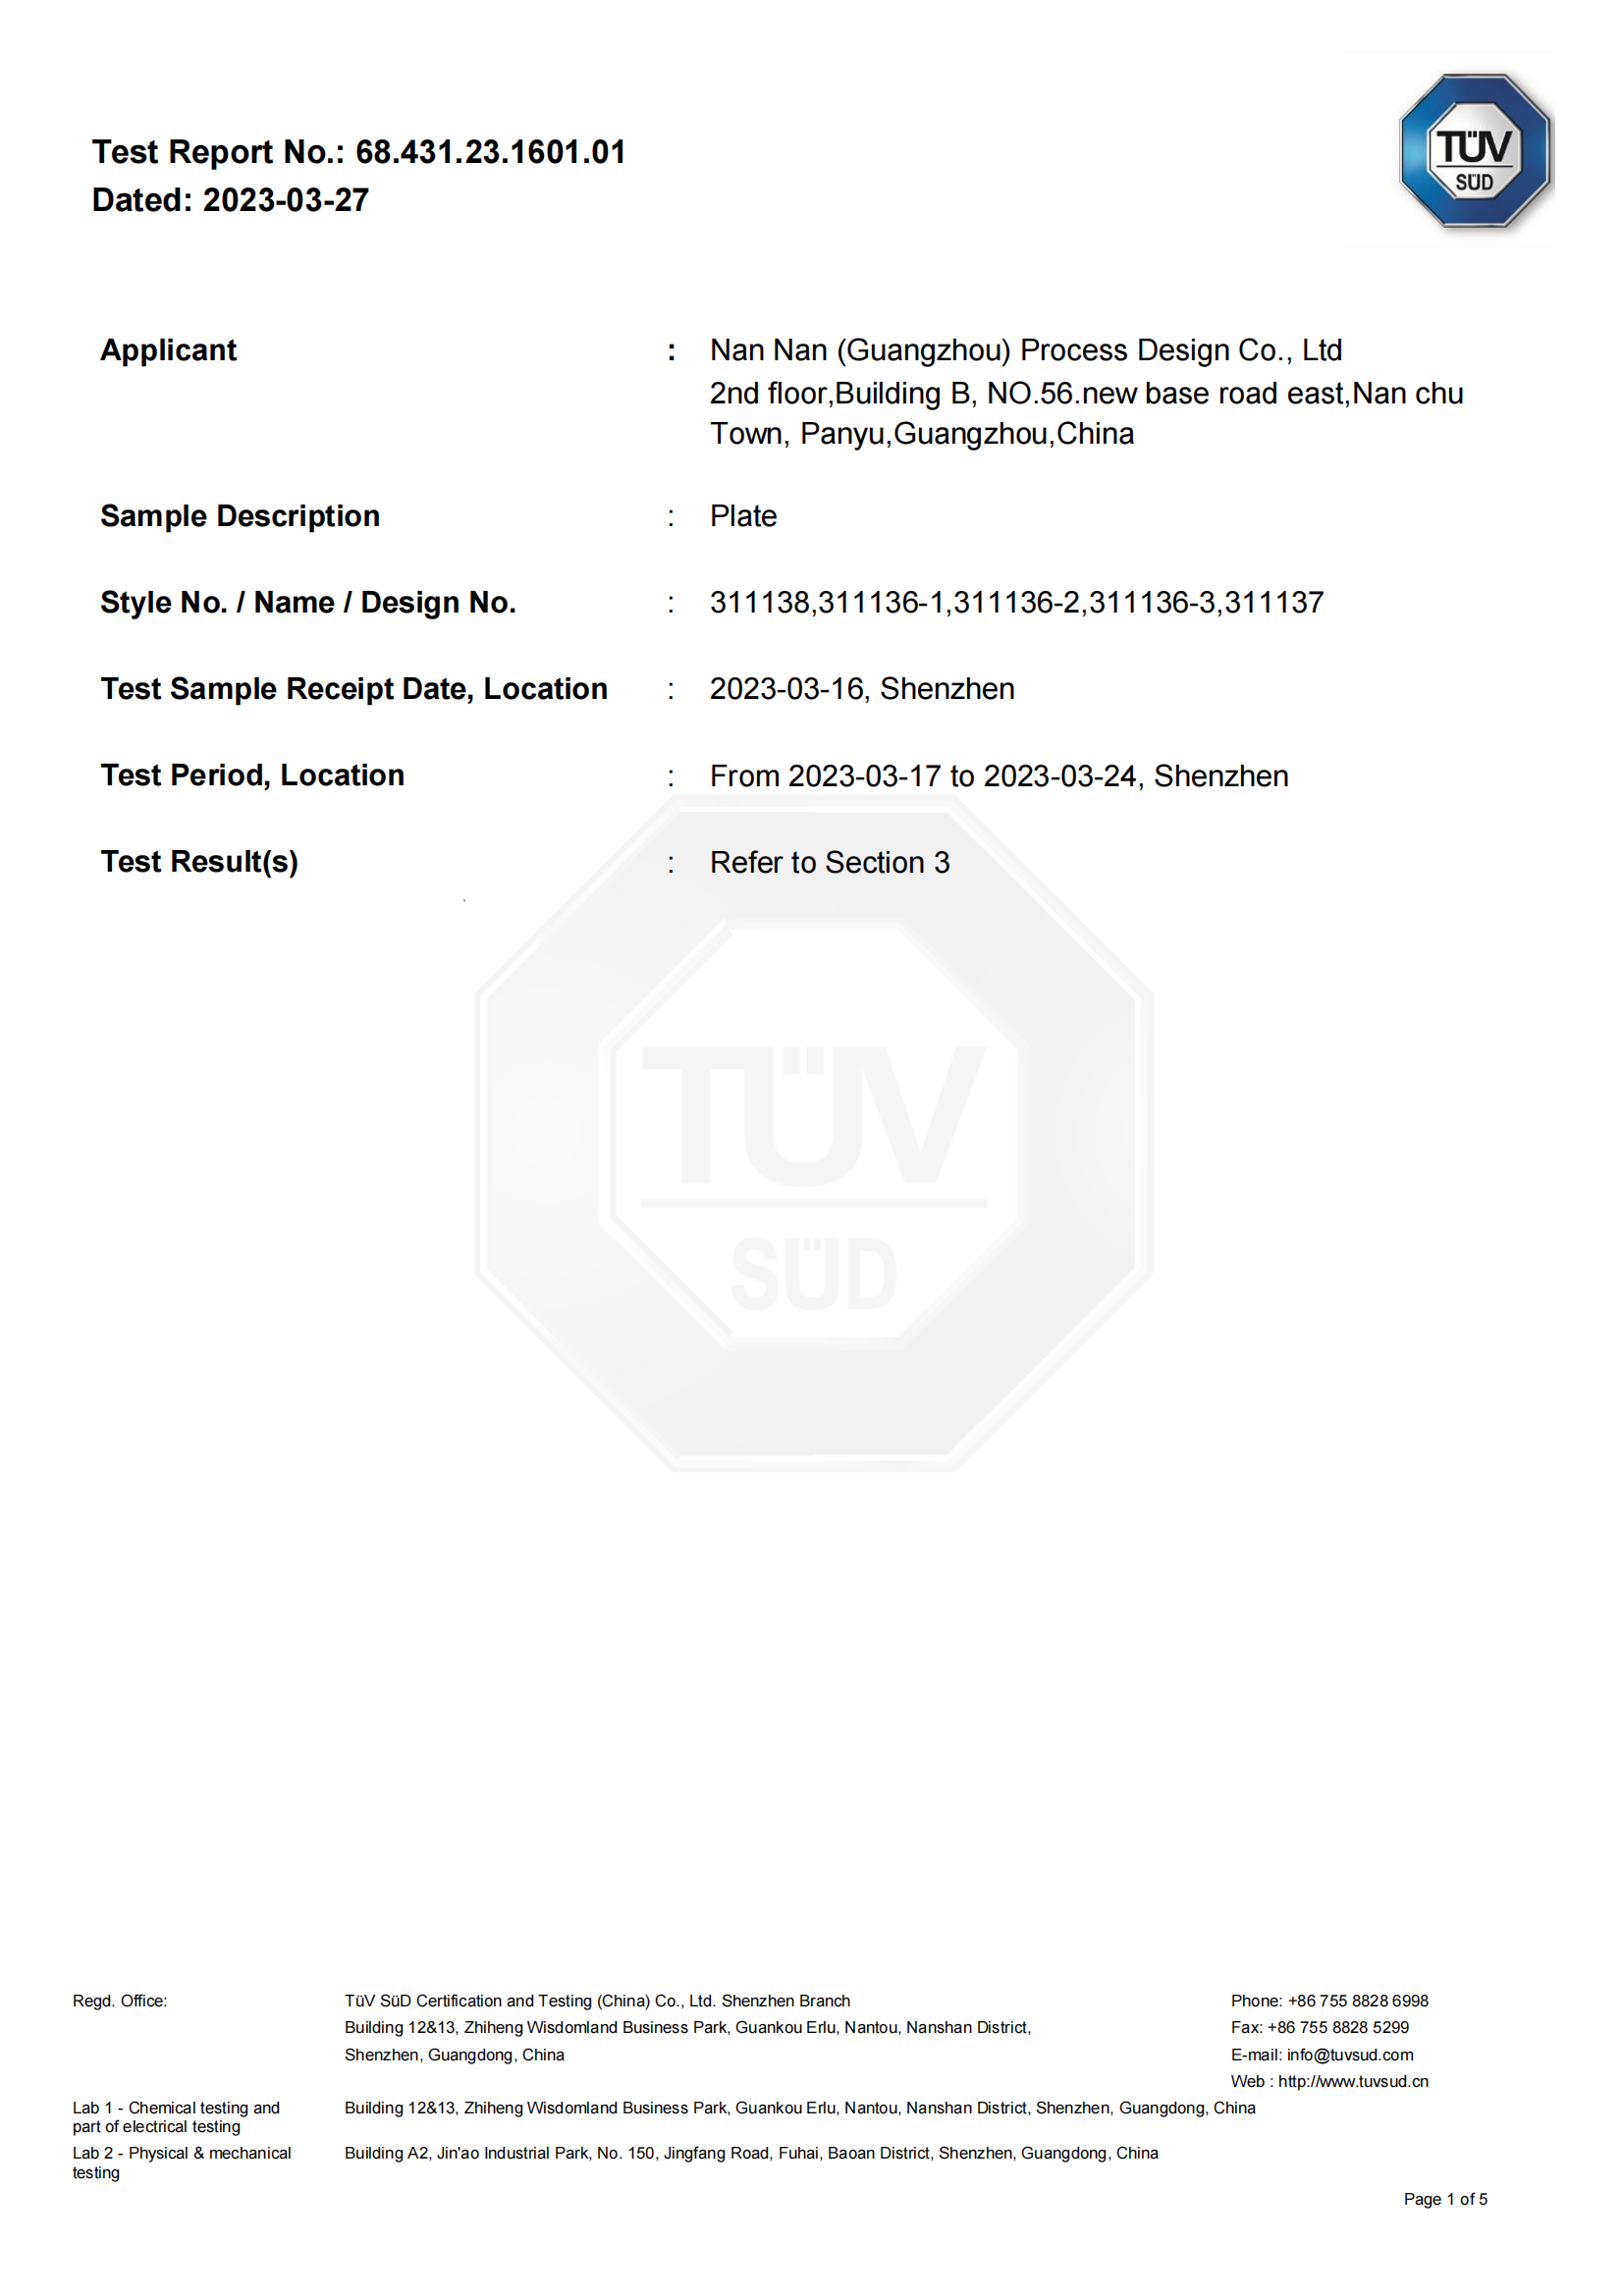 TUV Certification for Glass Plate__04